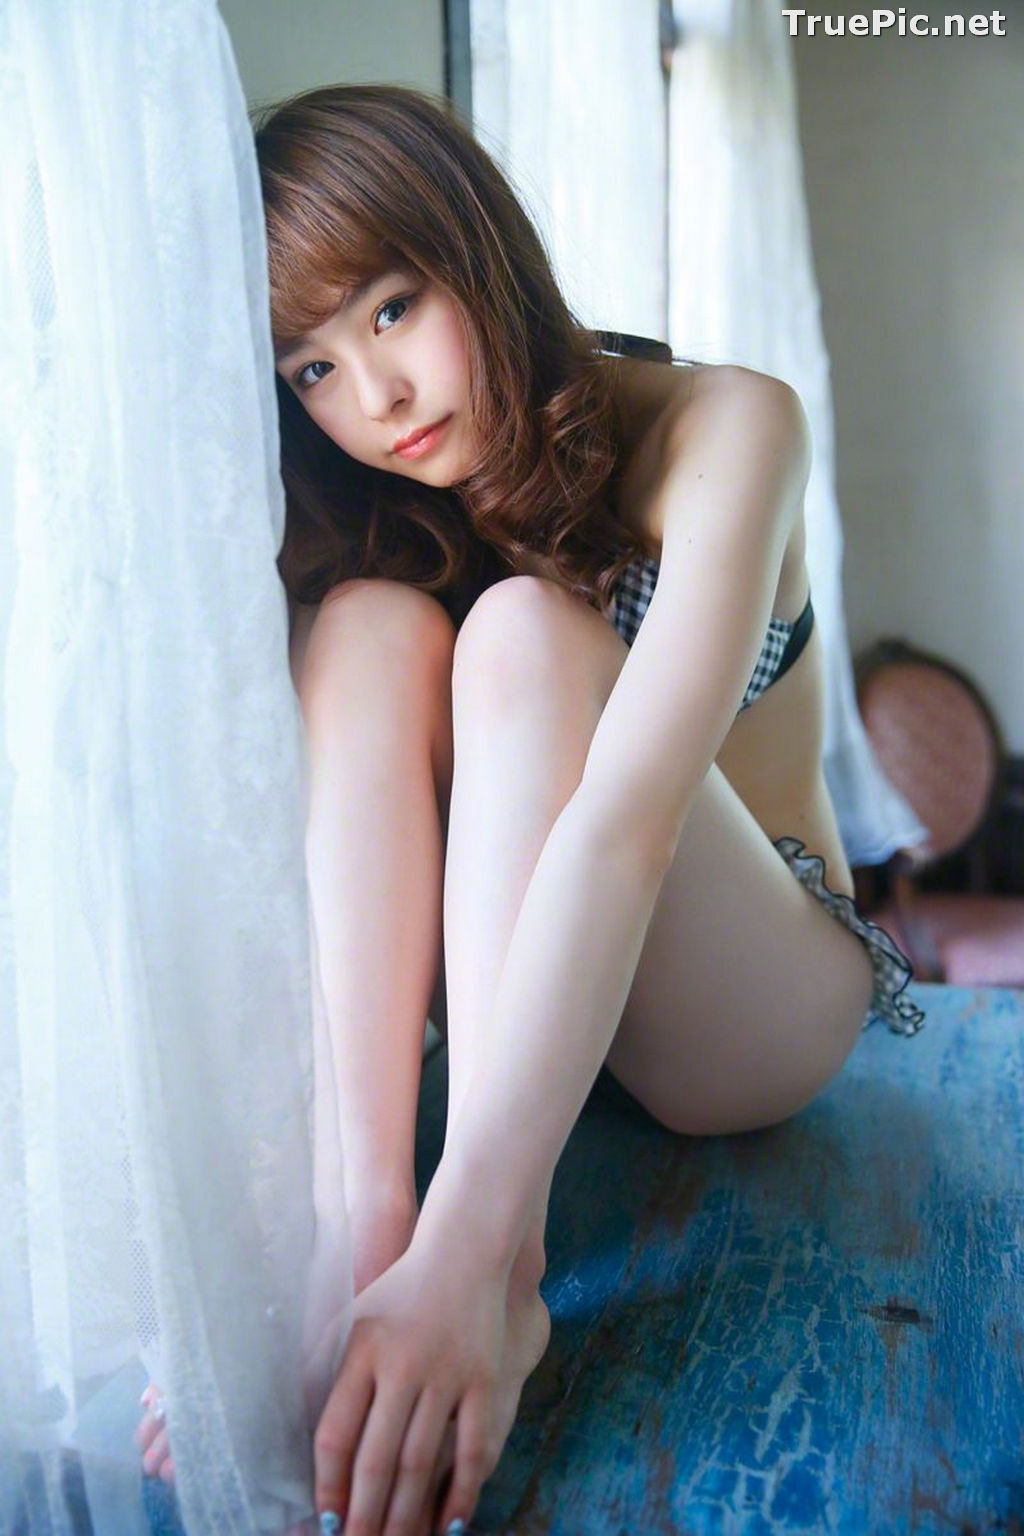 Image Wanibooks No.139-140 - Japanese Voice Actress and Singer - Rena Sato - TruePic.net - Picture-103